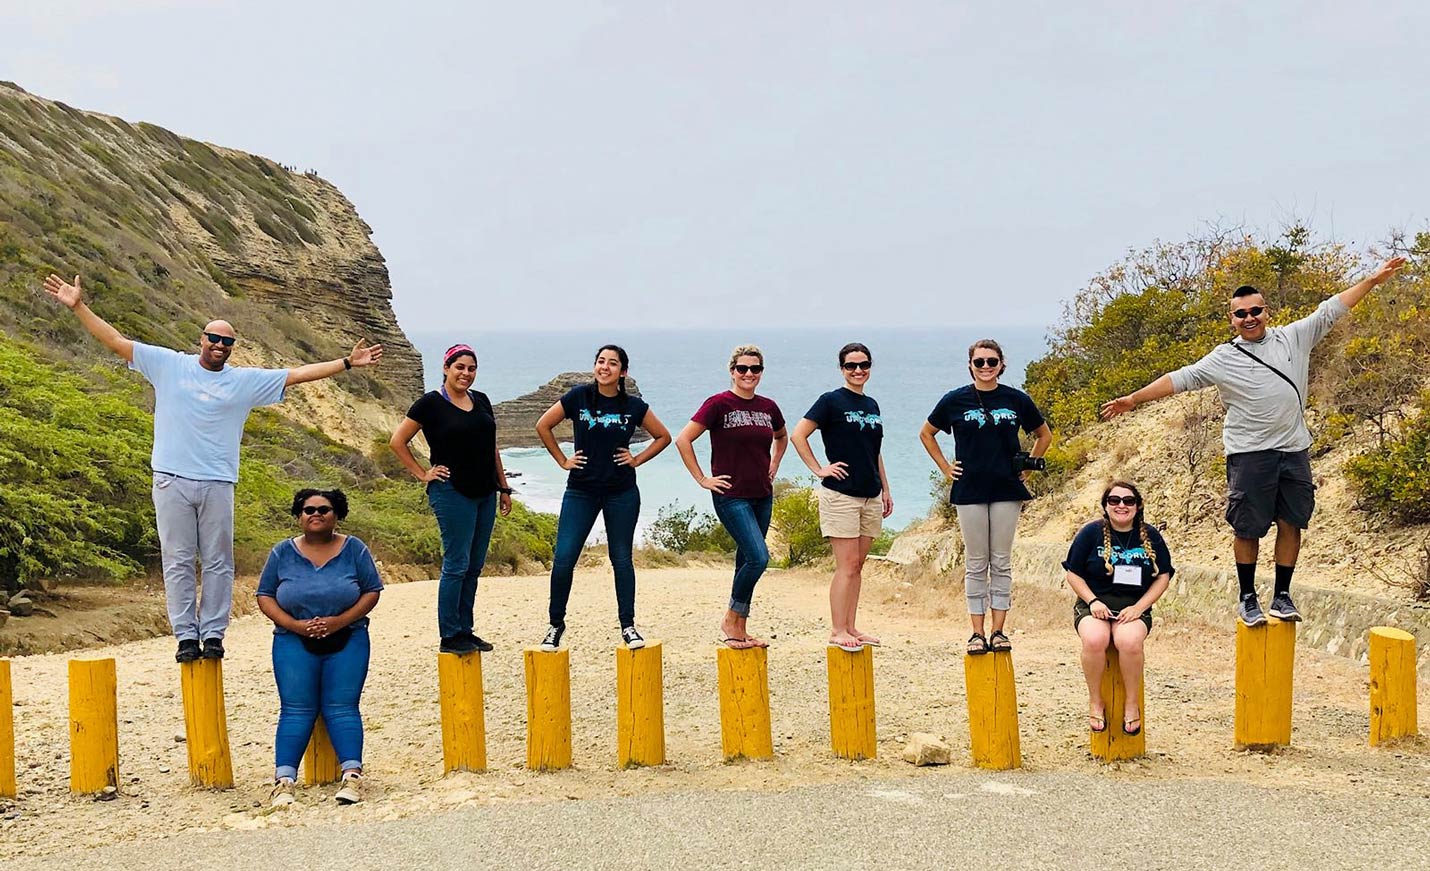 A group of students, some wearing UNCW World T-shirts, stand on pilings on a rocky beach